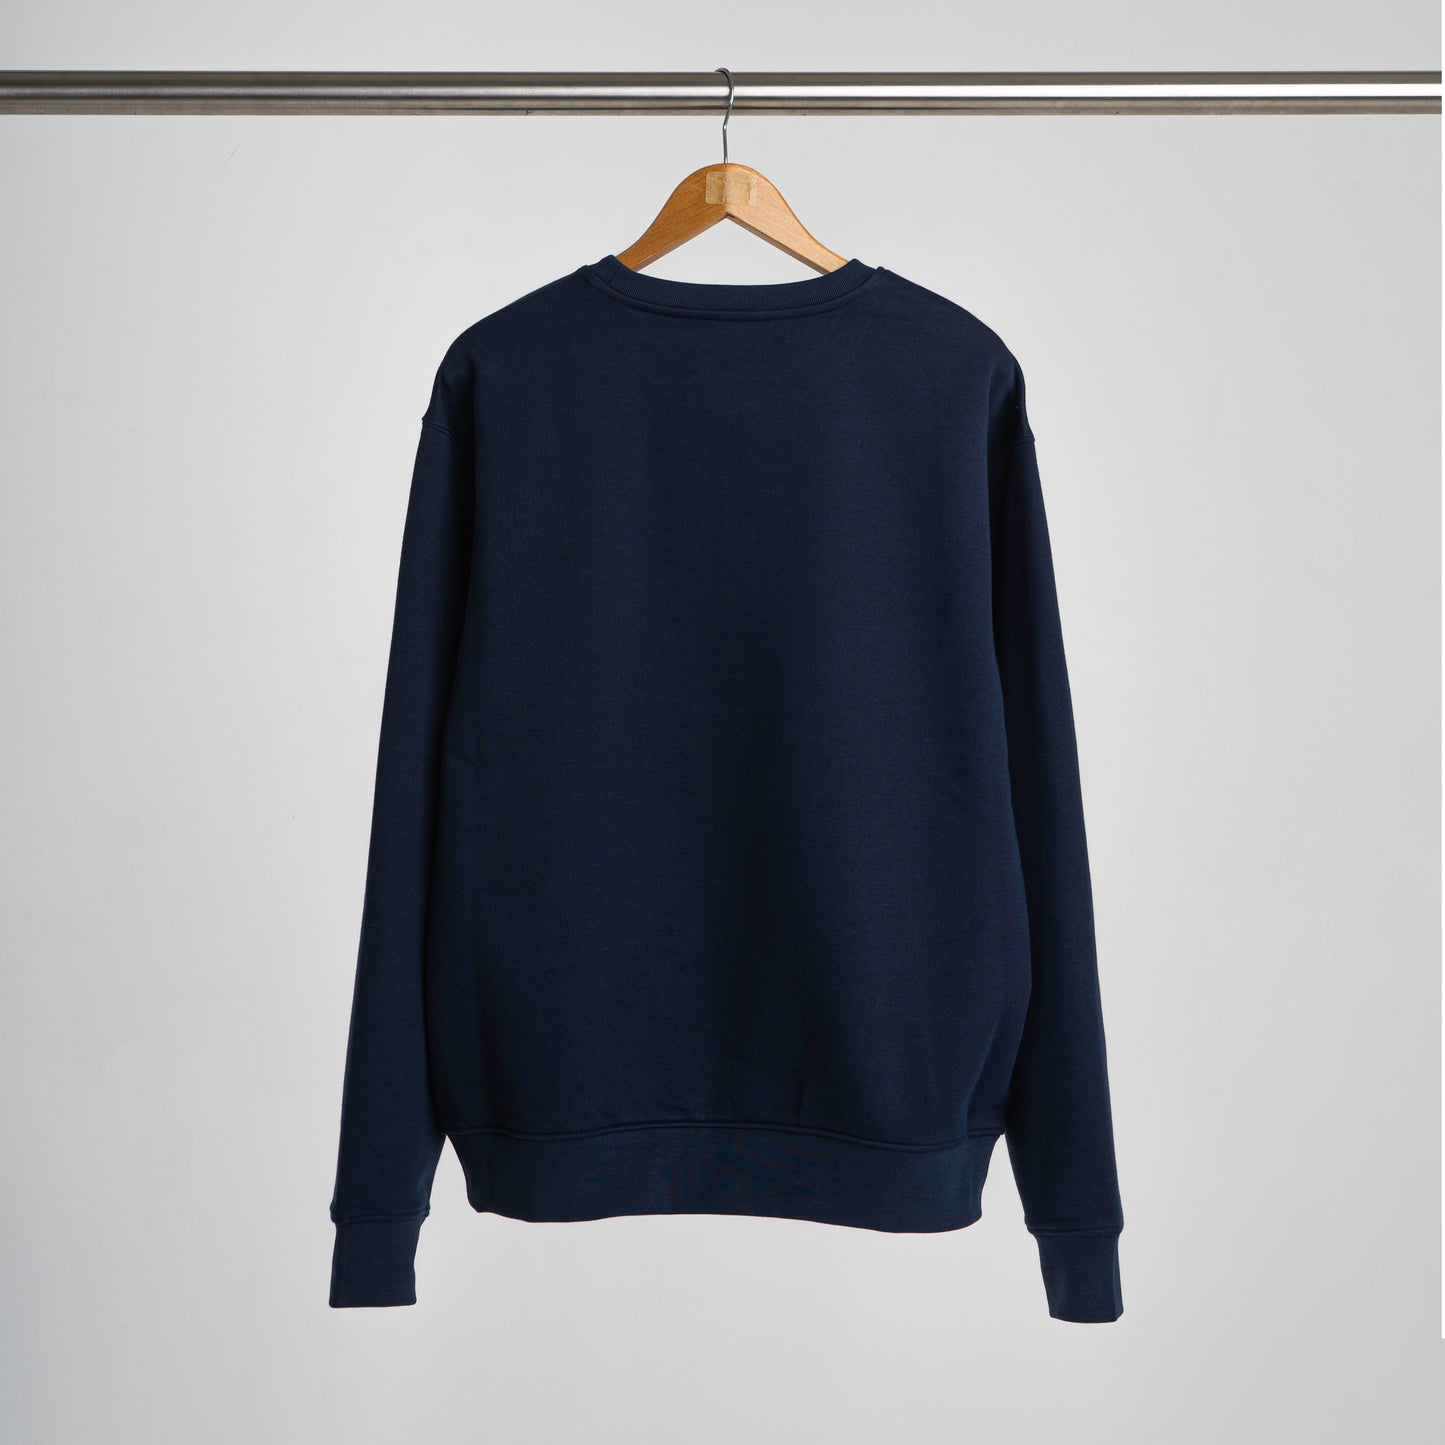 The official NYCK navy sweater